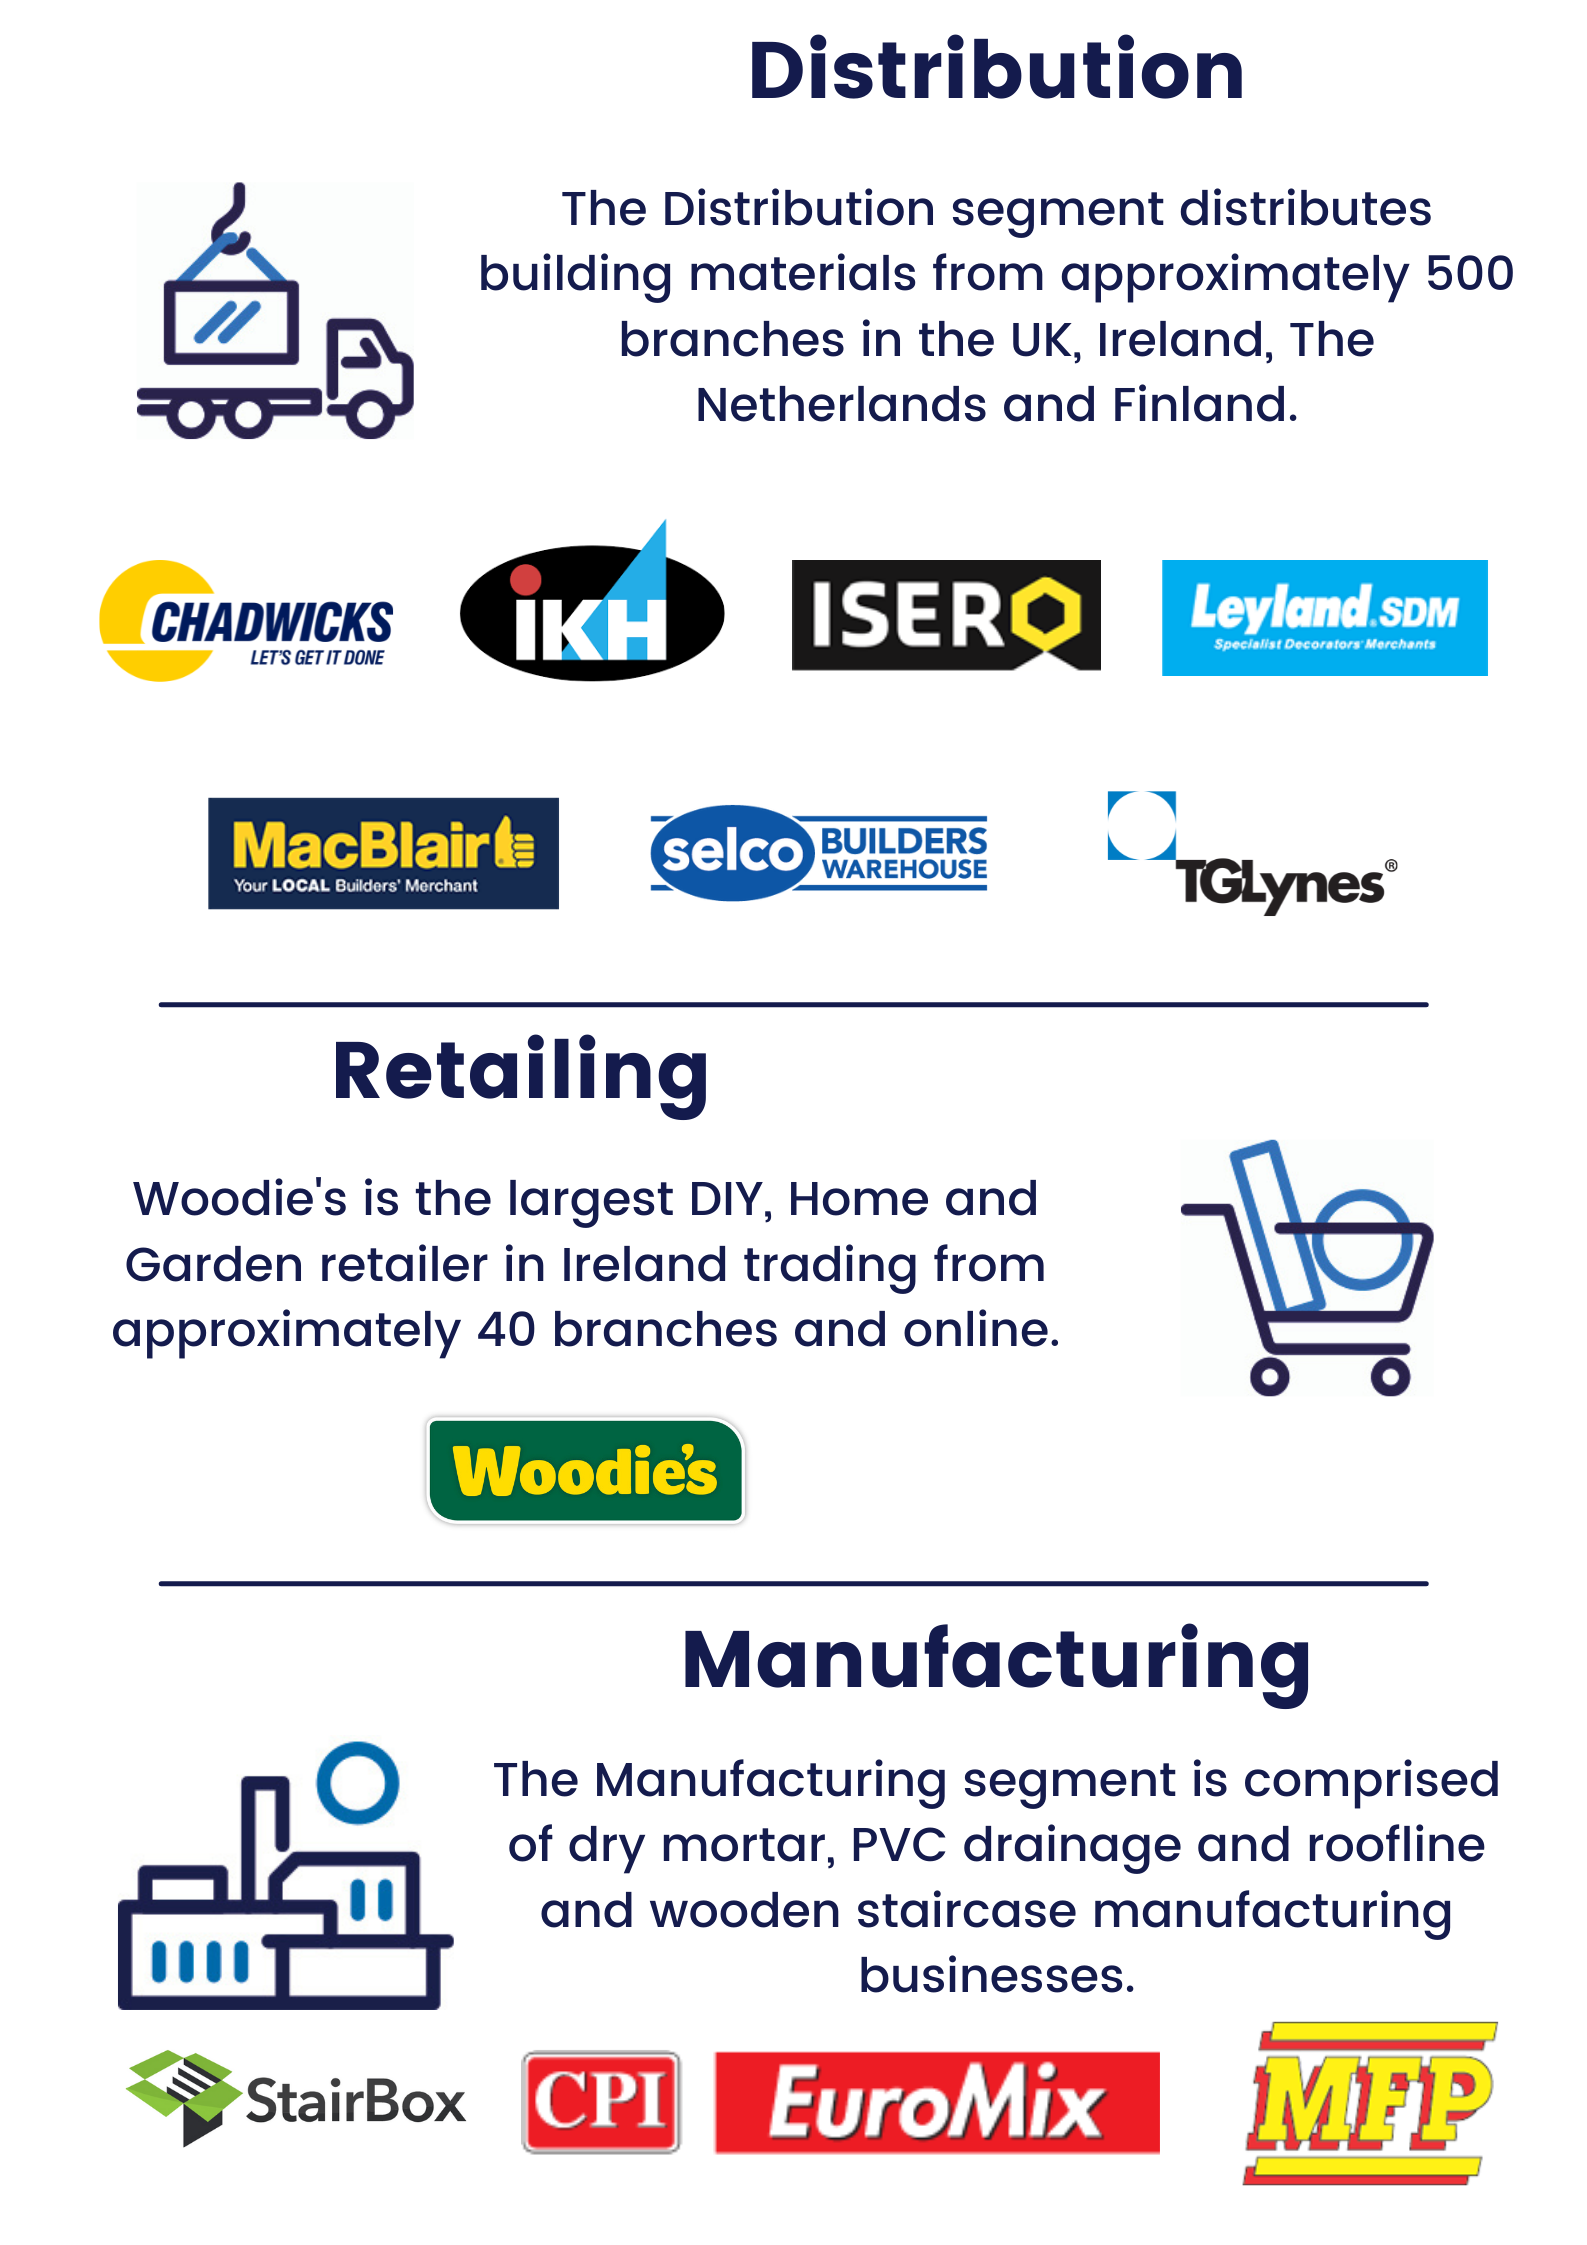 Grafton Group plc sectors. They are distribution, retailing and manufacturing. ​The Distribution segment distributes building materials from approximately 500 branches in the UK, Ireland, The Netherlands and Finland under the businesses Chadwicks Group. IKH, Isero, Leyland SDM, MacBlair, Selco Builders Warehouse and TG Lynes. Woodie's is the largest DIY, Home and Garden retailer in Ireland trading from approximately 40 branches and online.​​ The Manufacturing segment is comprised of dry mortar, PVC drainage and roofline and wooden staircase manufacturing businesses. This comes under the businesses StairBox, CPI Euromix and MFP. 